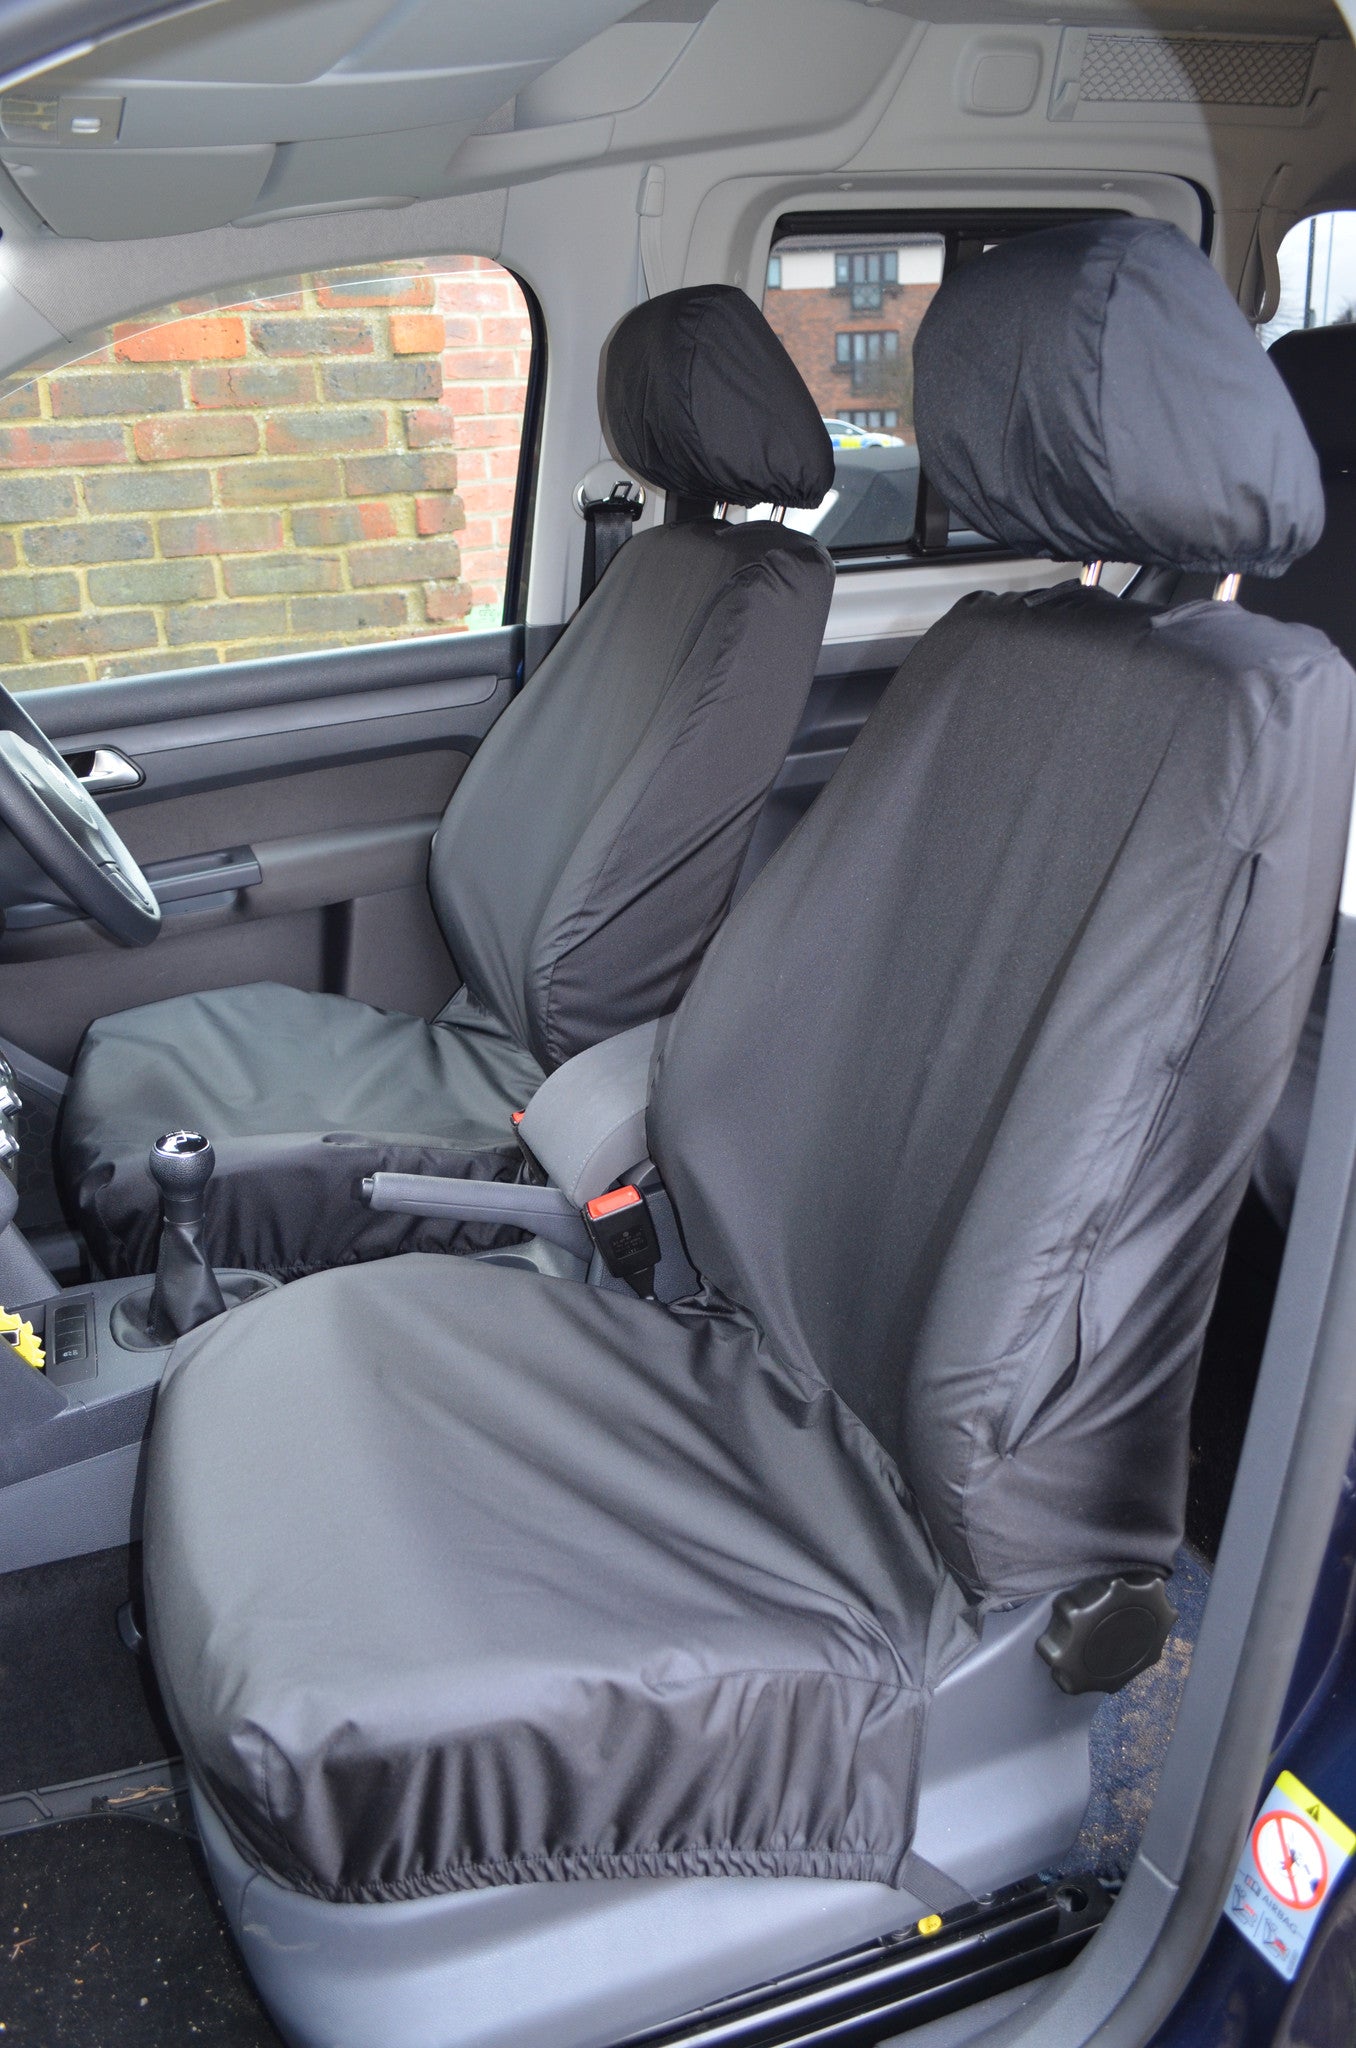 Volkswagen Caddy 2004 Onwards Seat Covers Front Pair / Black Turtle Covers Ltd